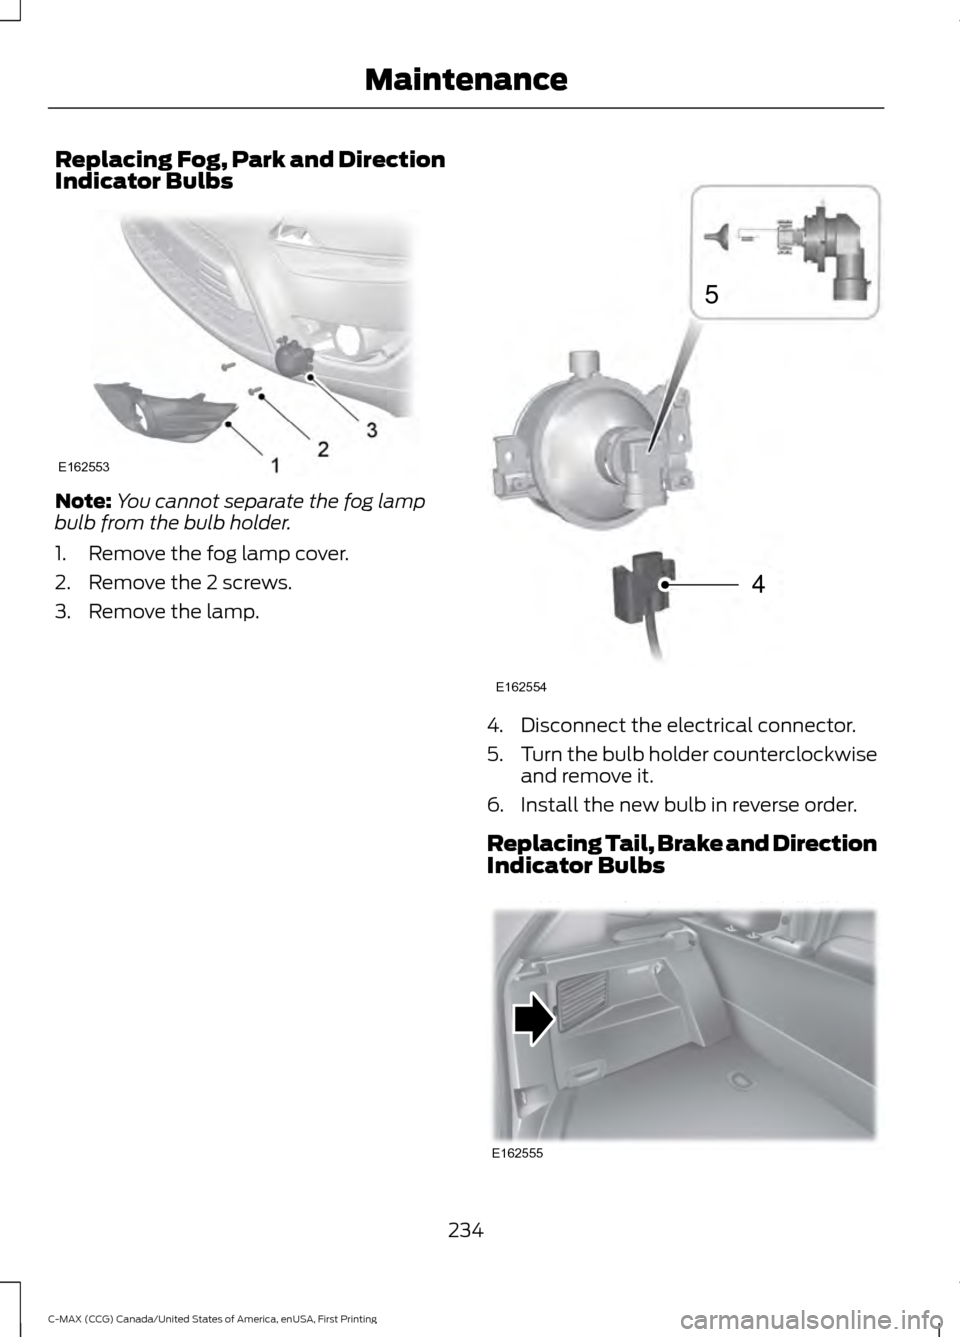 FORD C MAX HYBRID 2016 2.G Owners Guide Replacing Fog, Park and Direction
Indicator Bulbs
Note:
You cannot separate the fog lamp
bulb from the bulb holder.
1. Remove the fog lamp cover.
2. Remove the 2 screws.
3. Remove the lamp. 4. Disconn